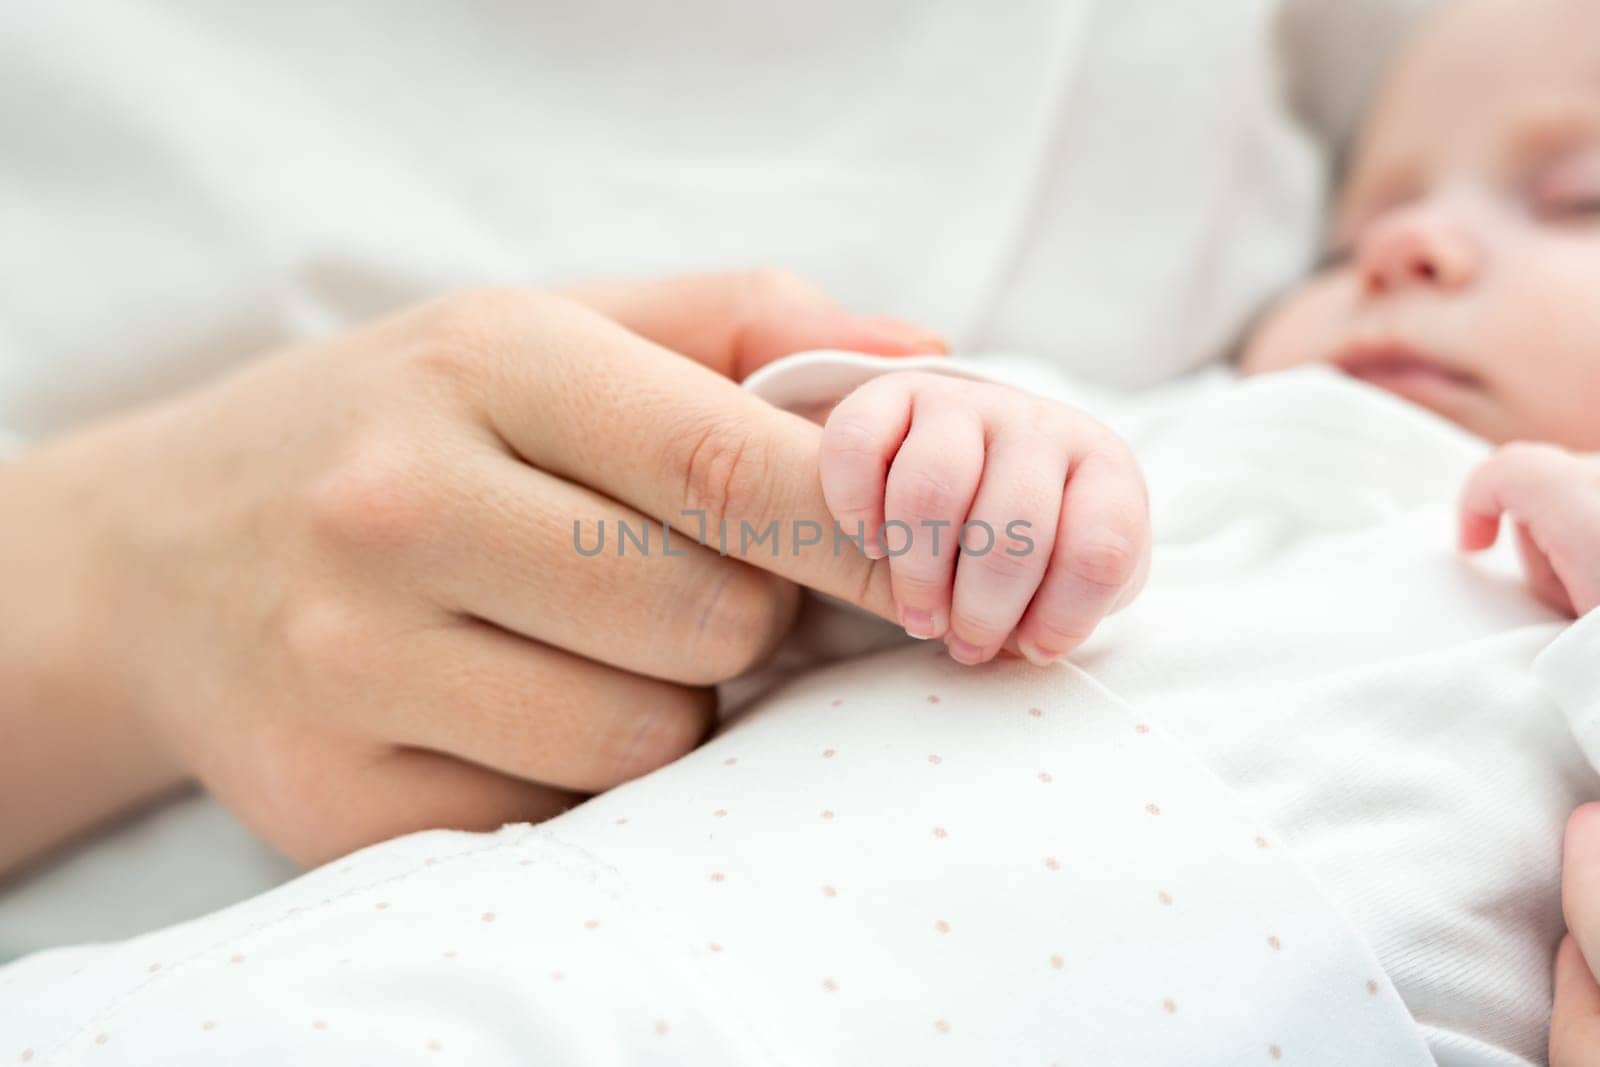 Close-up showcases the sleeping newborn baby holding onto mother's hand, manifesting innate bond and protection